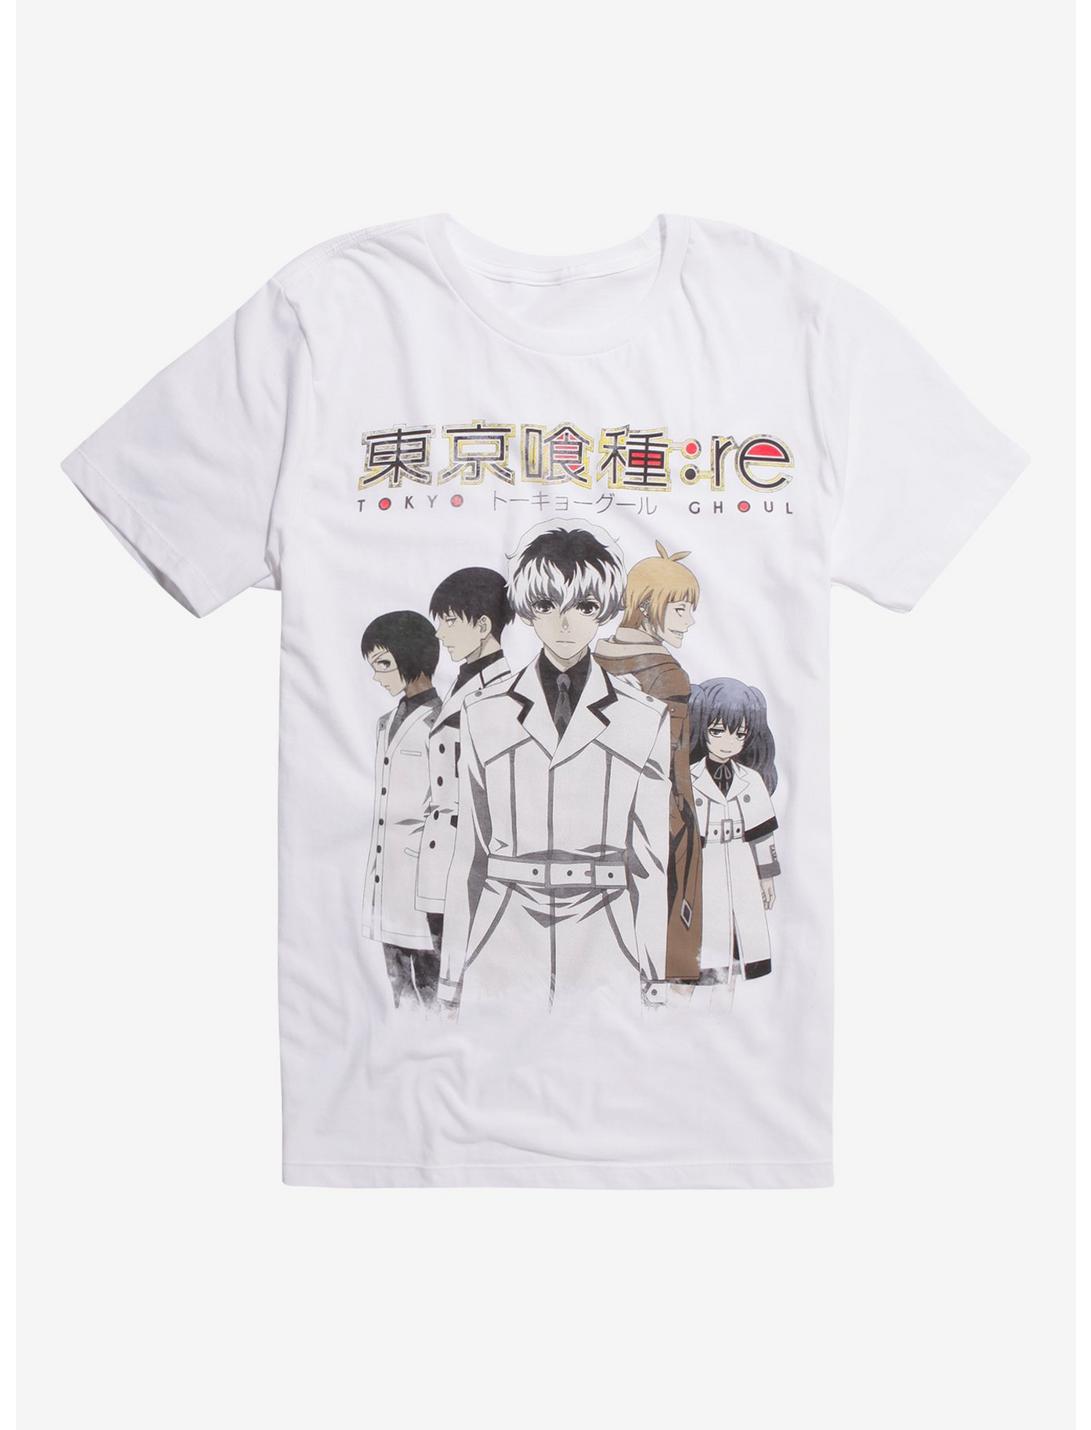 Tokyo Ghoul: Re Group White T-Shirt Hot Topic Exclusive, WHITE, hi-res